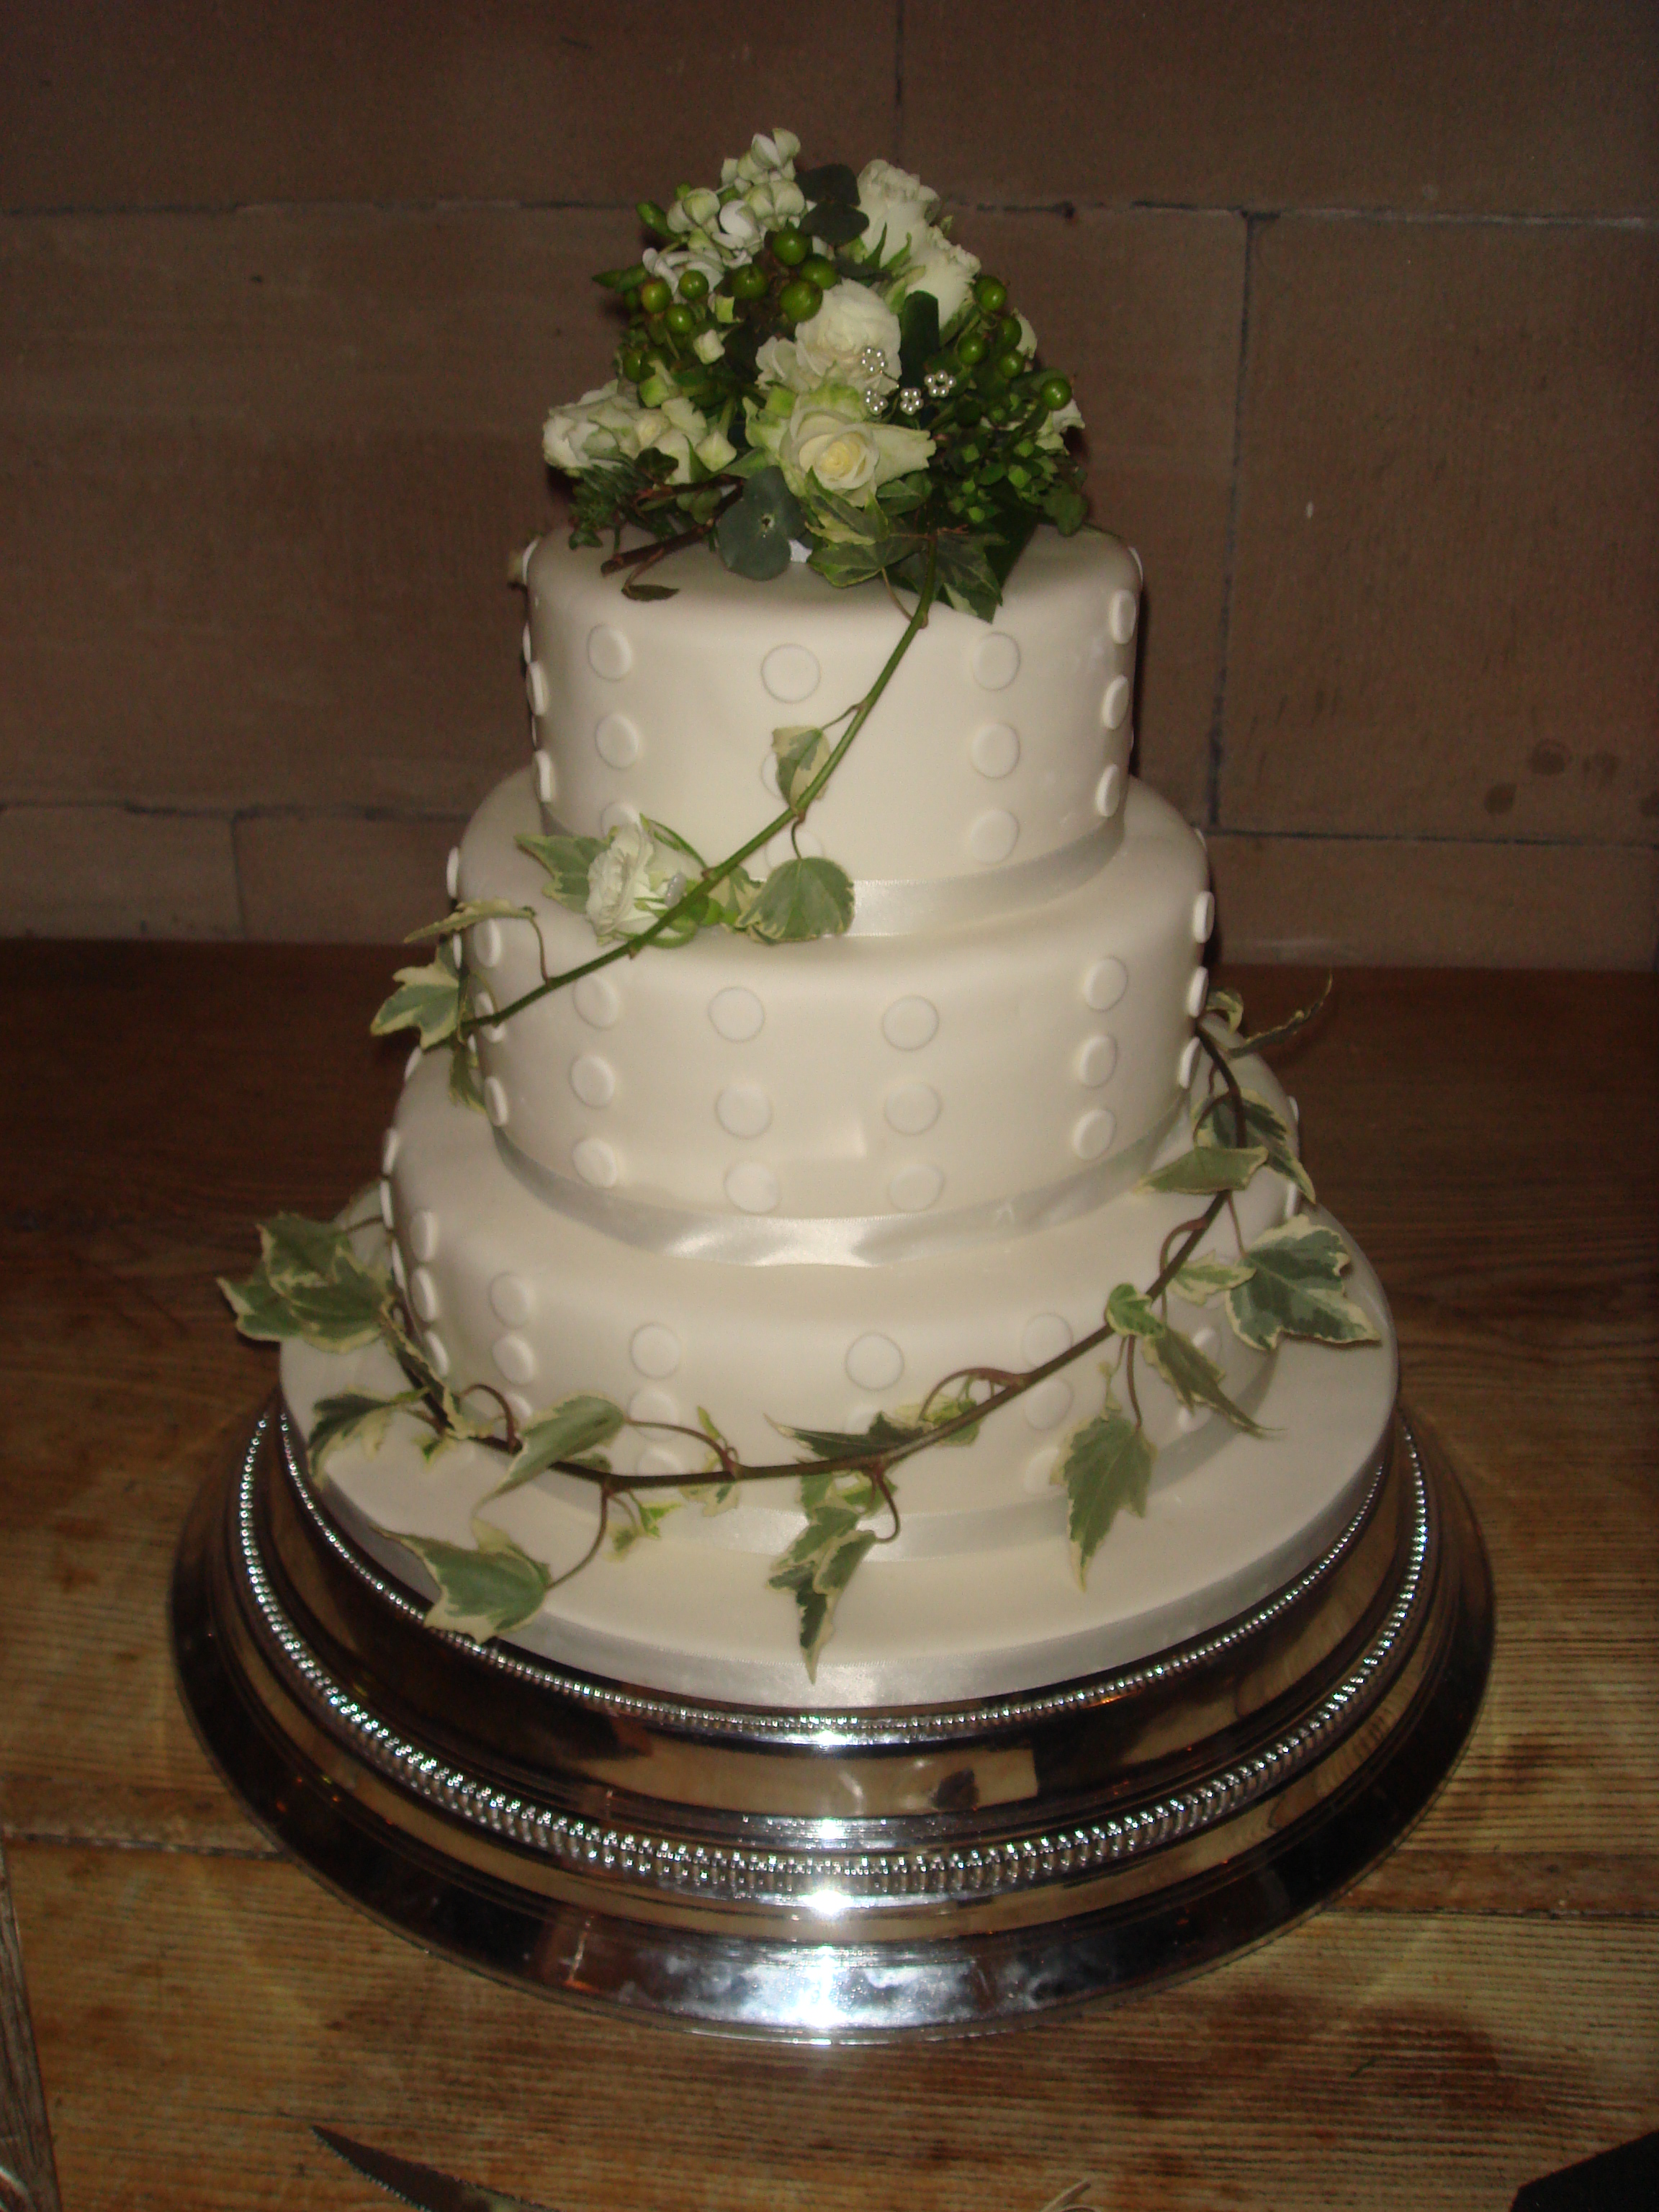 A white wedding cake with flowers on it